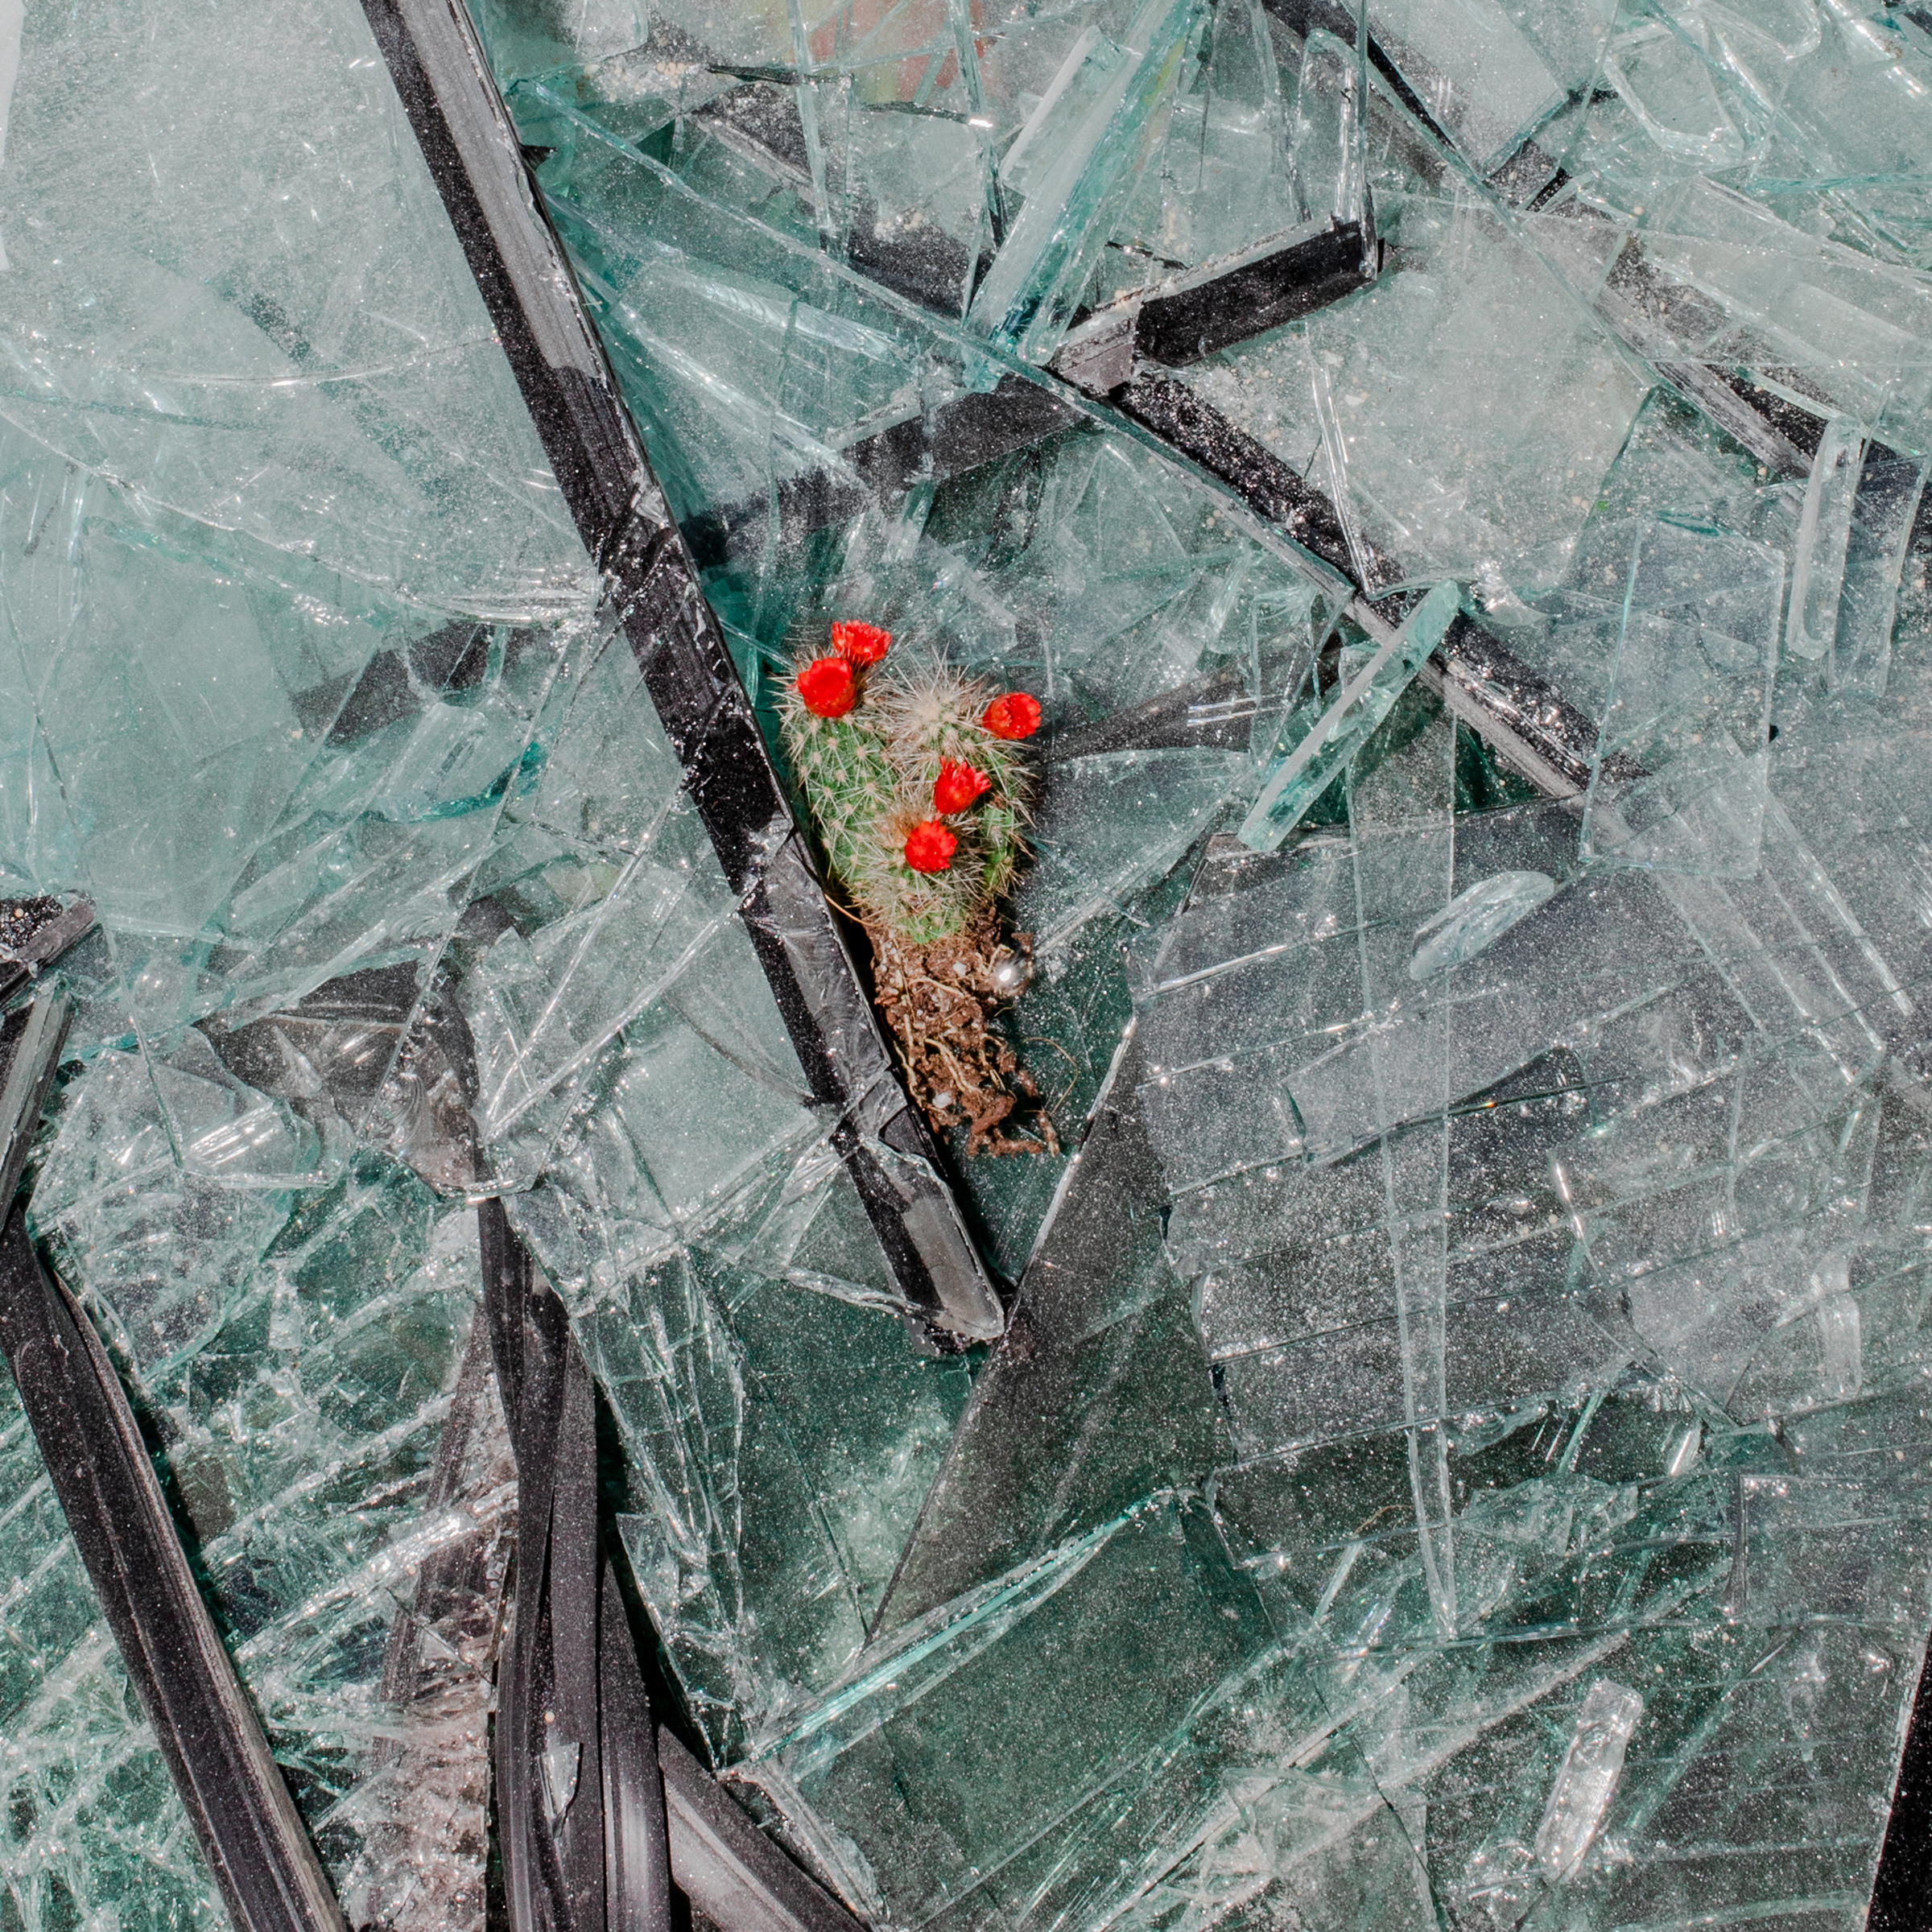 A cactus rests on broken glass. Cleanup efforts have been left to volunteers, with authorities all but invisible. (Myriam Boulos for TIME)